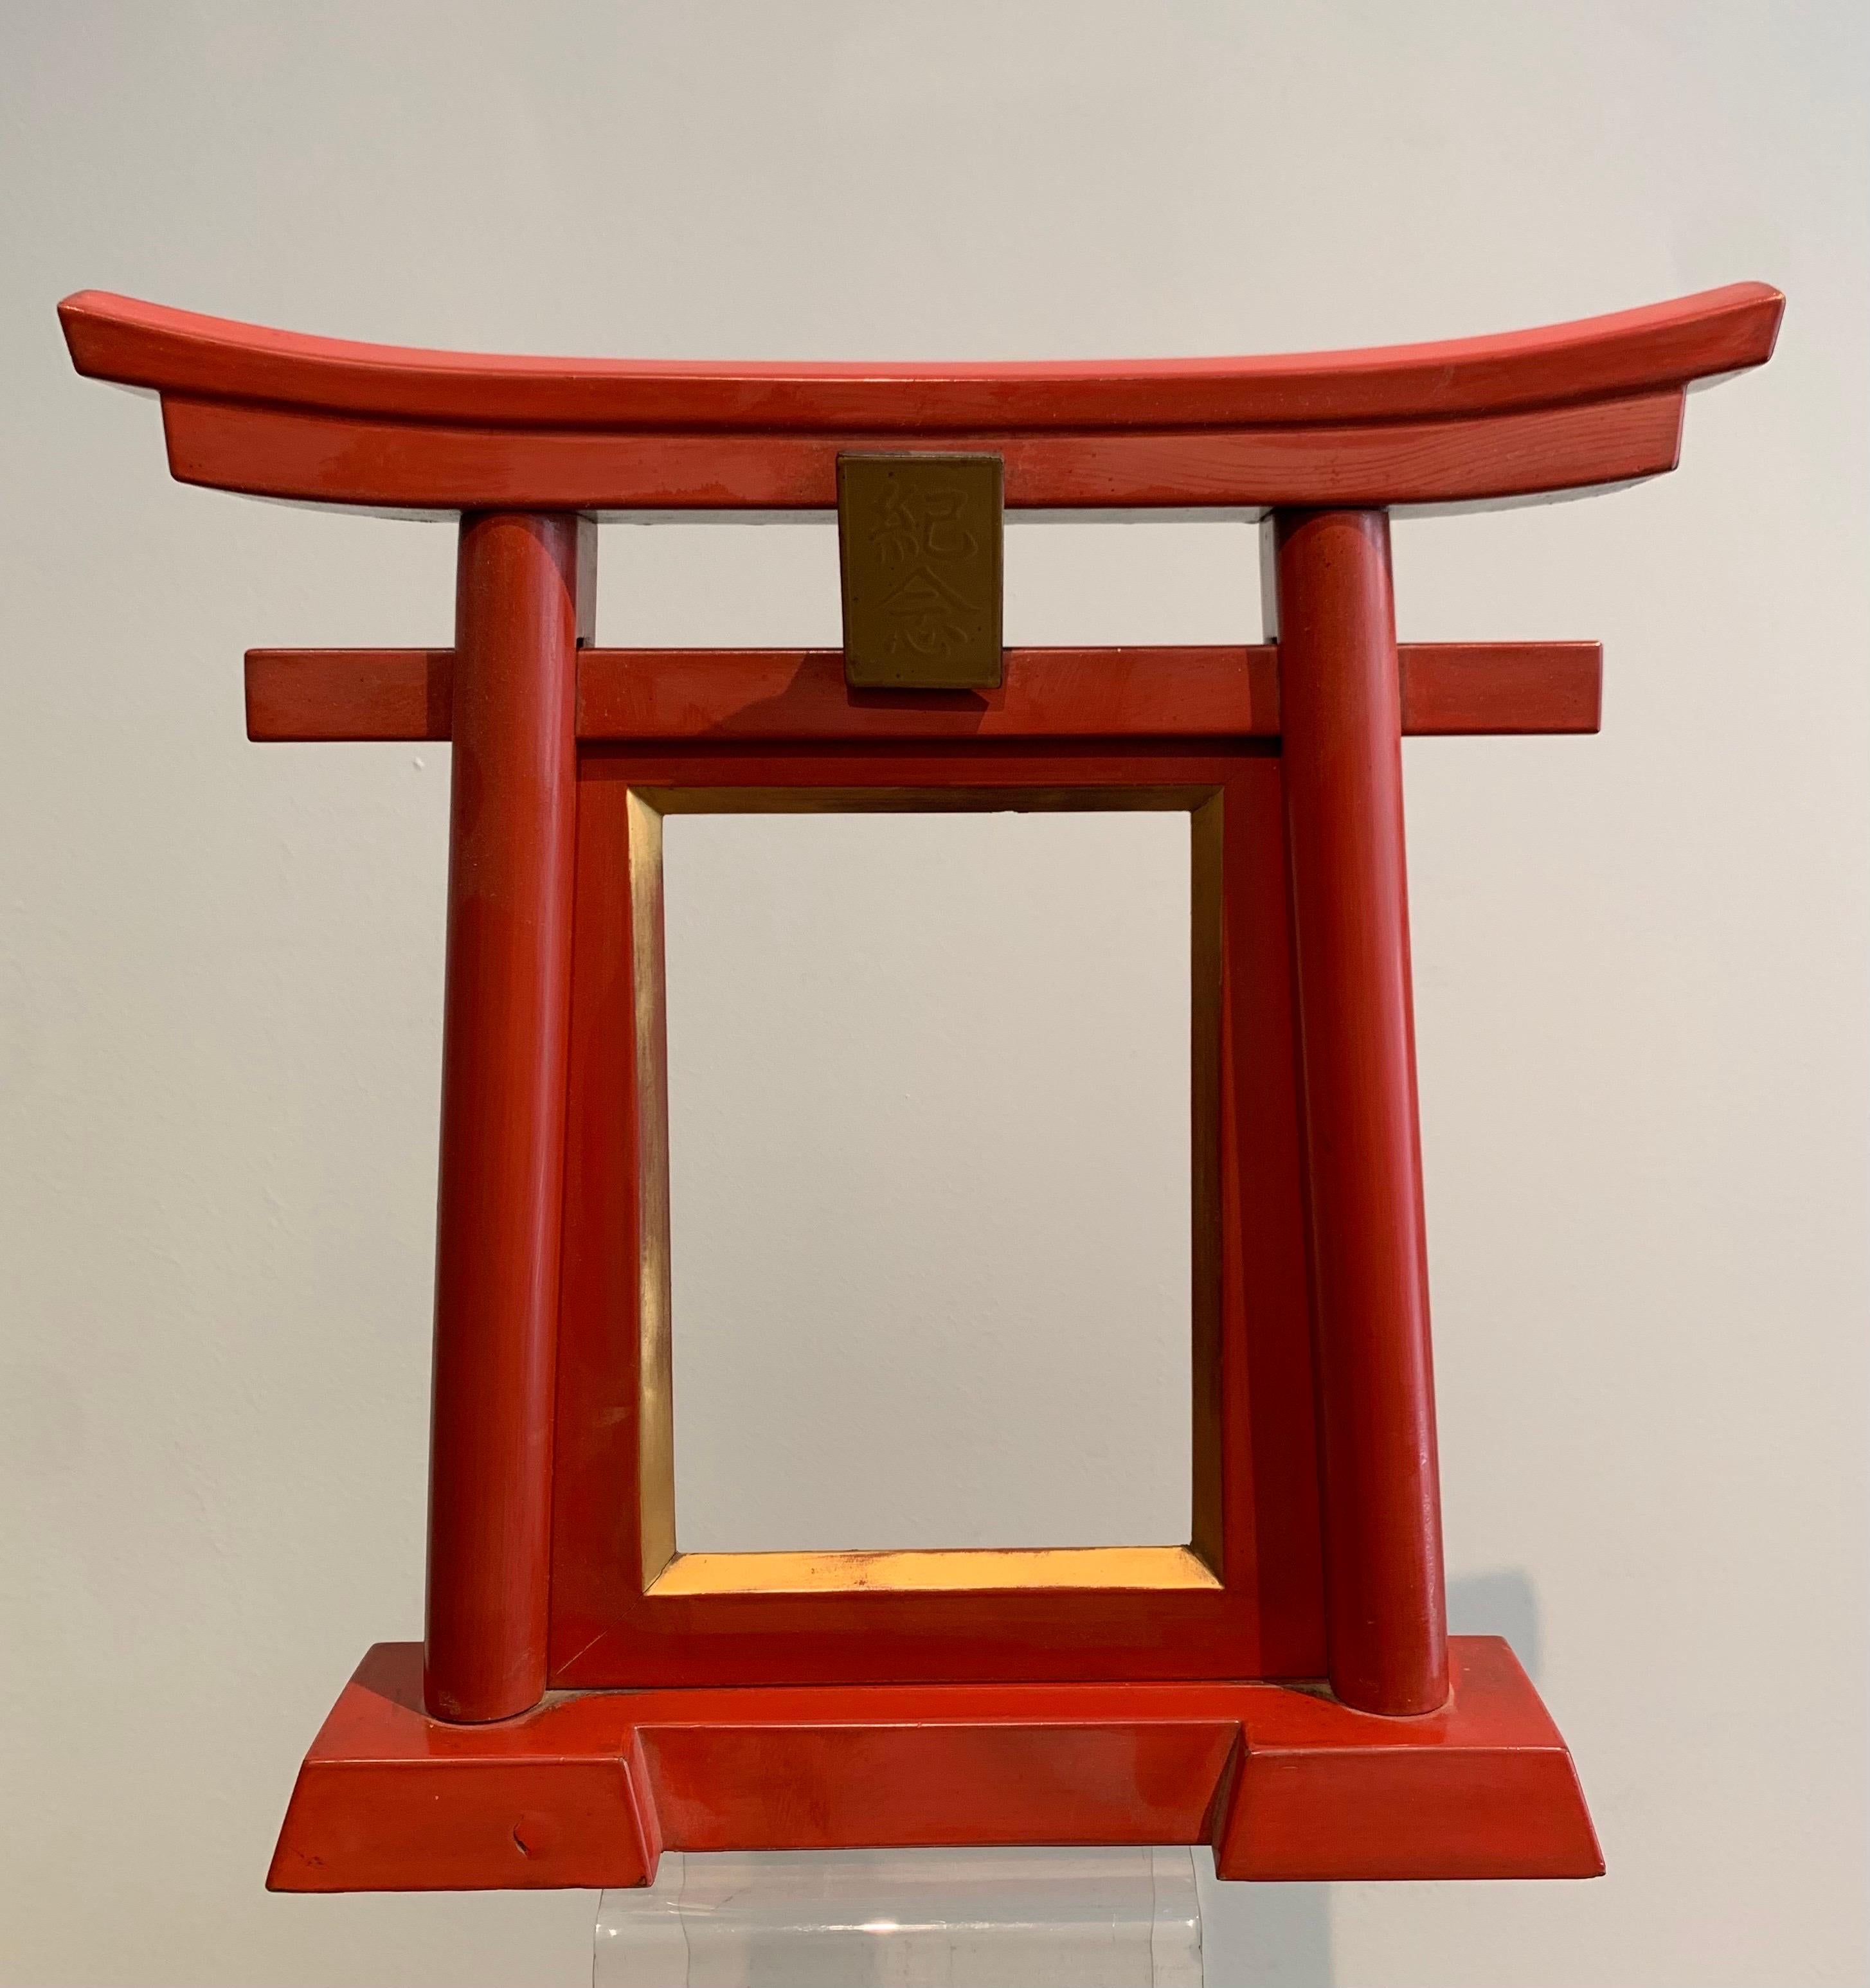 20th Century Japanese Lacquered Wood Photo Frame, Torii Gate, 1920s